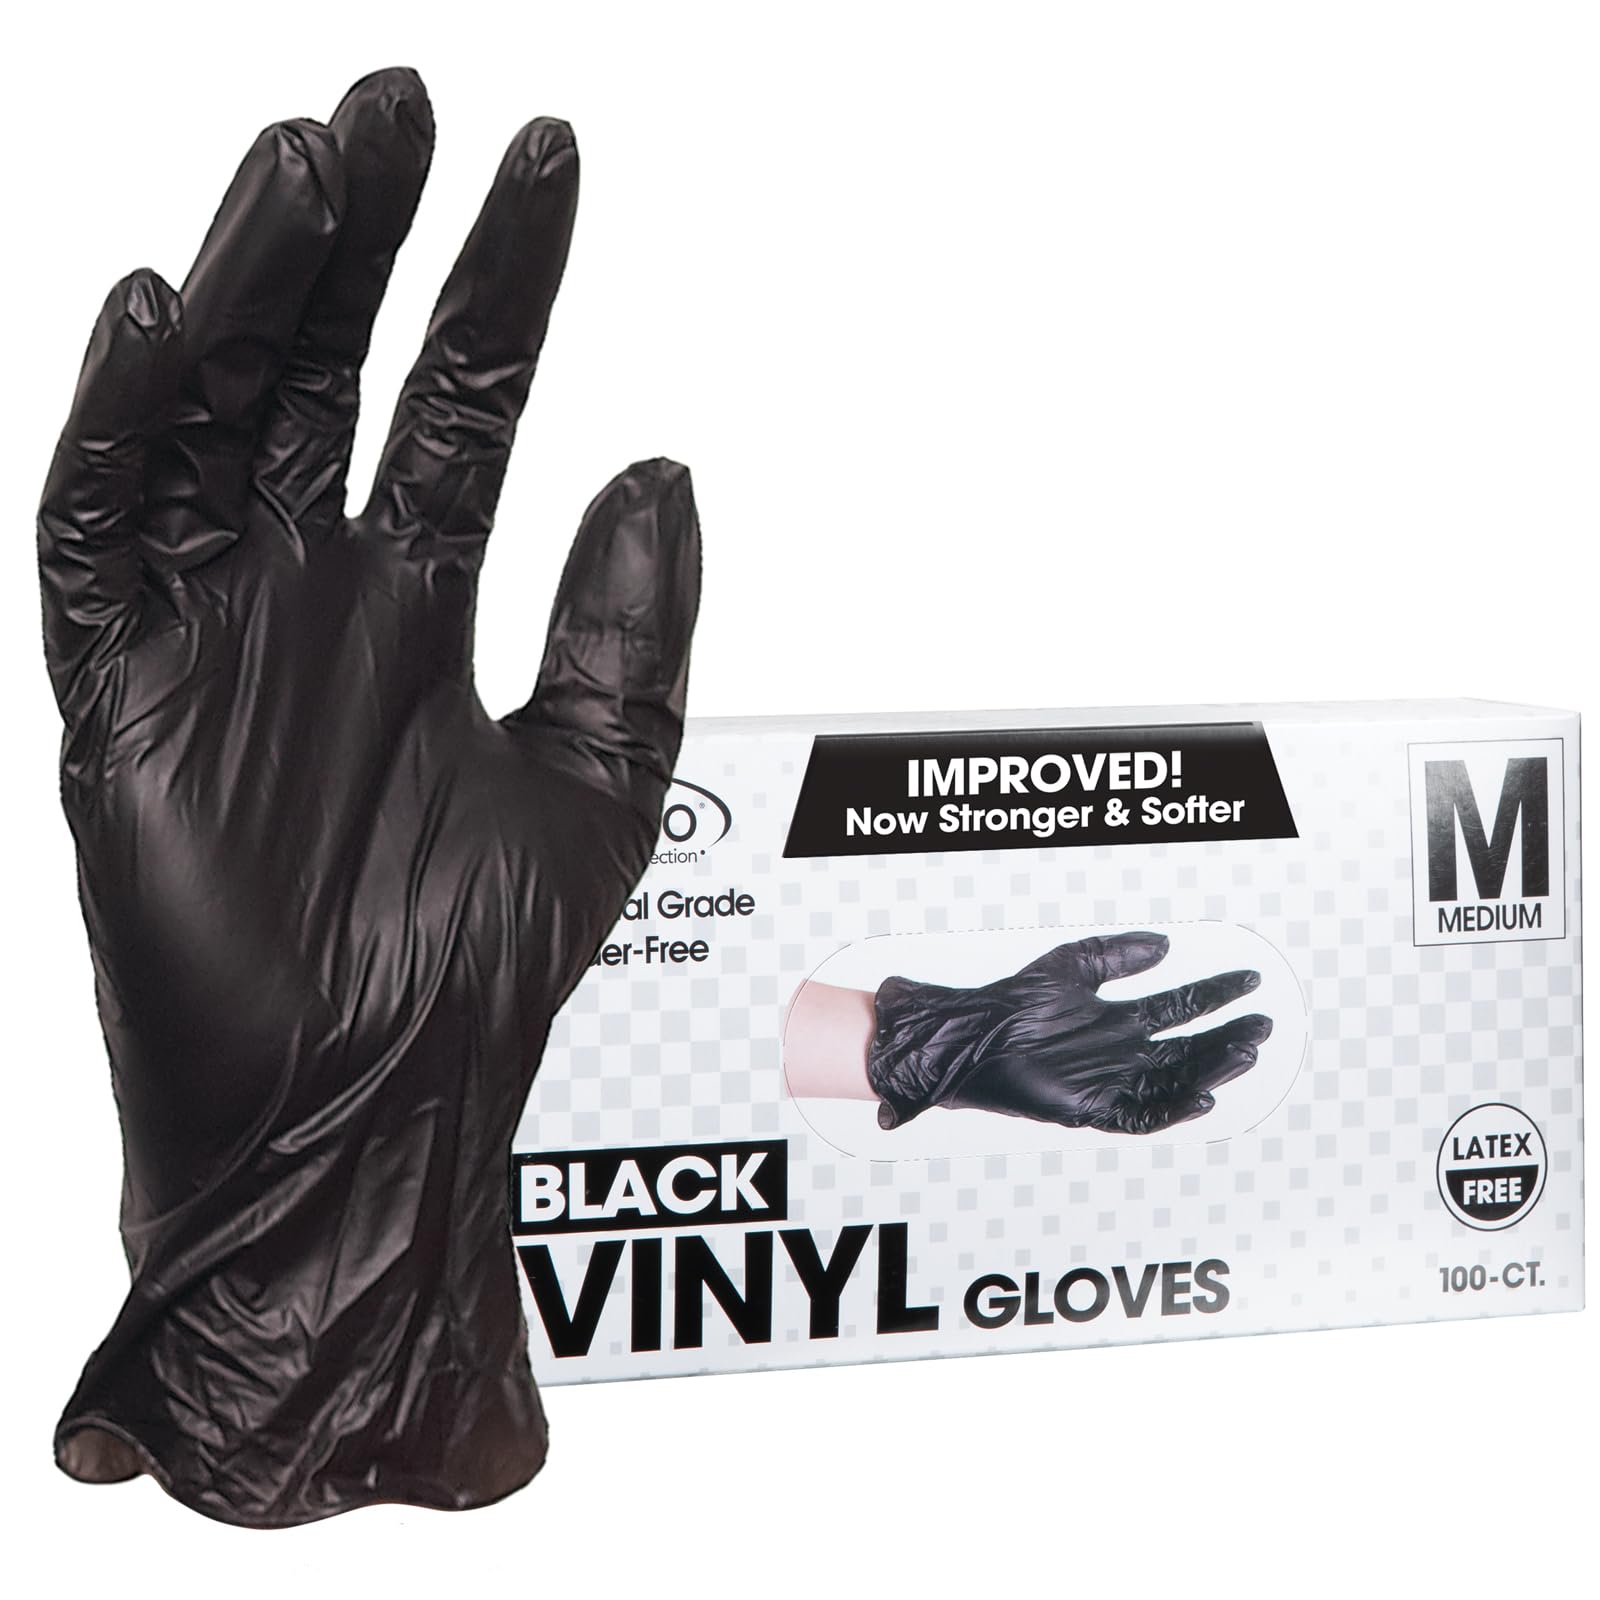 ForPro Disposable Vinyl Gloves, Black, Industrial Grade, Powder-Free, Latex-Free, Non-Sterile, Food Safe, 2.75 Mil. Palm, 3.9 Mil. Fingers, Medium, 100-Count